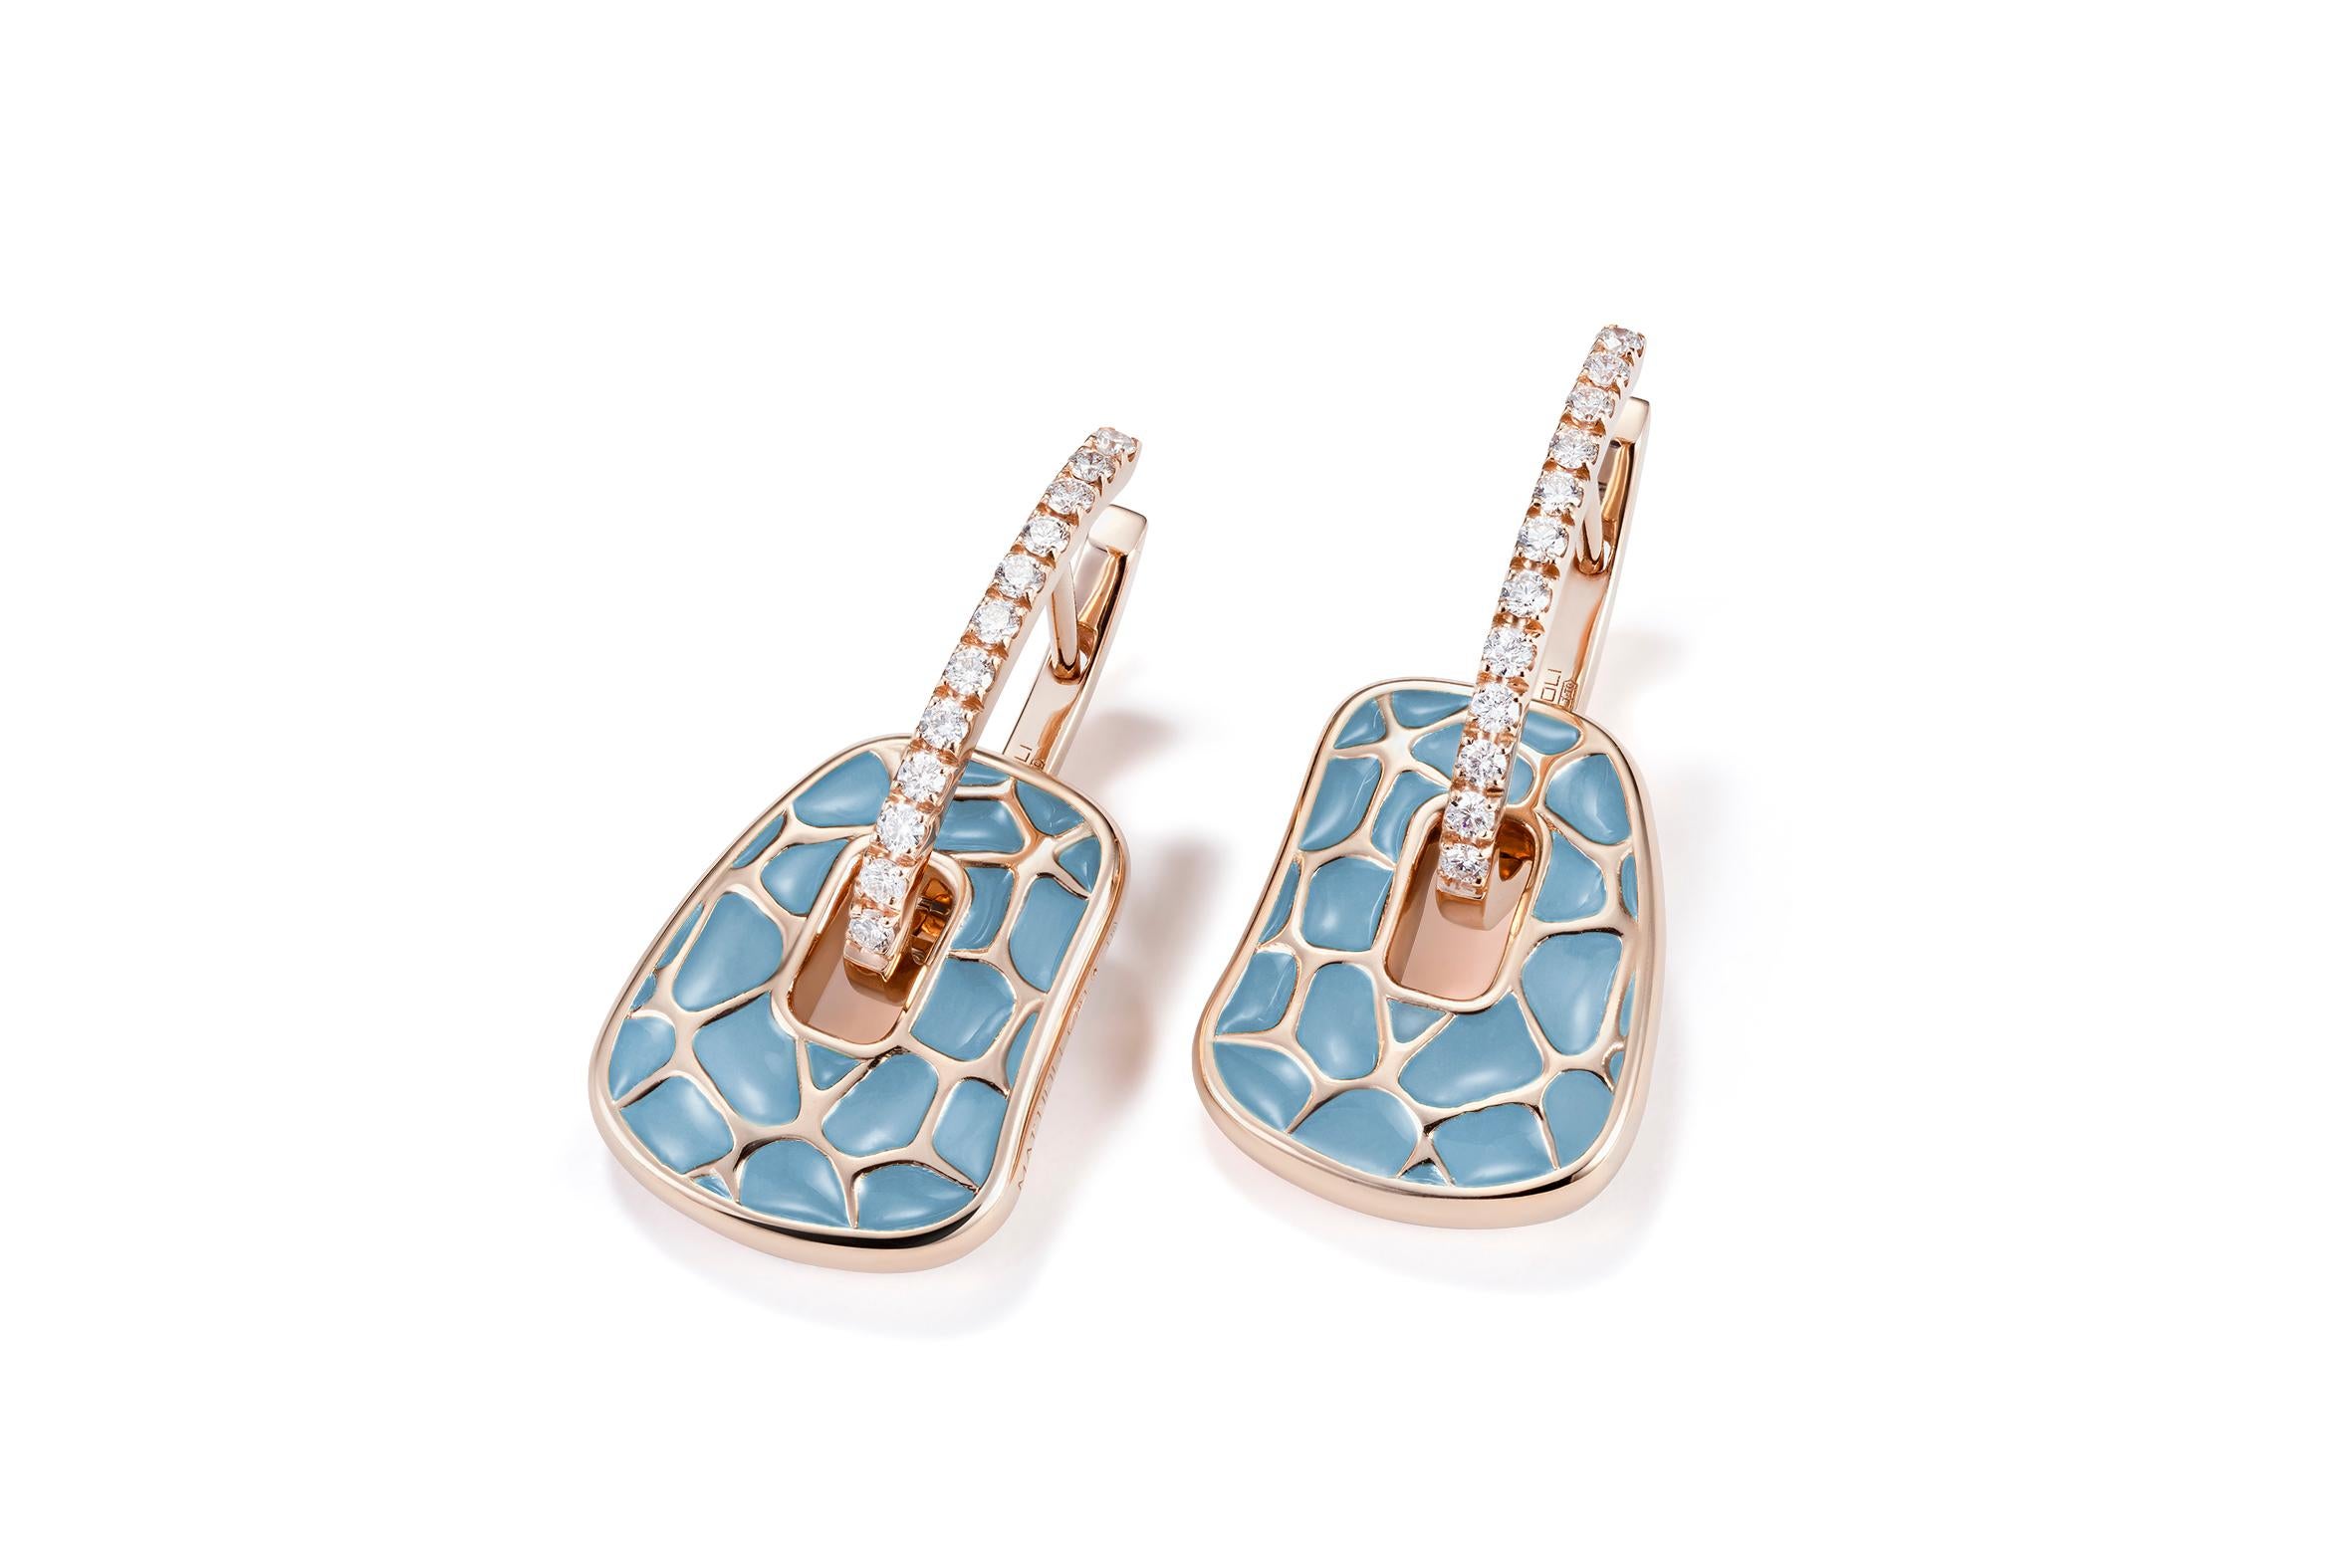 Mattioli Puzzle Safari Medium 18K Rose Gold Earrings Sky Blue Enamel w/White Diamonds
Also available in Brown Diamonds
Earrings in rose gold 
Diamonds carat 0.40 ct
Weight 19.60 gr  Measure 22x27mm or 0.75 inches
Puzzle pendants of mother of pearl